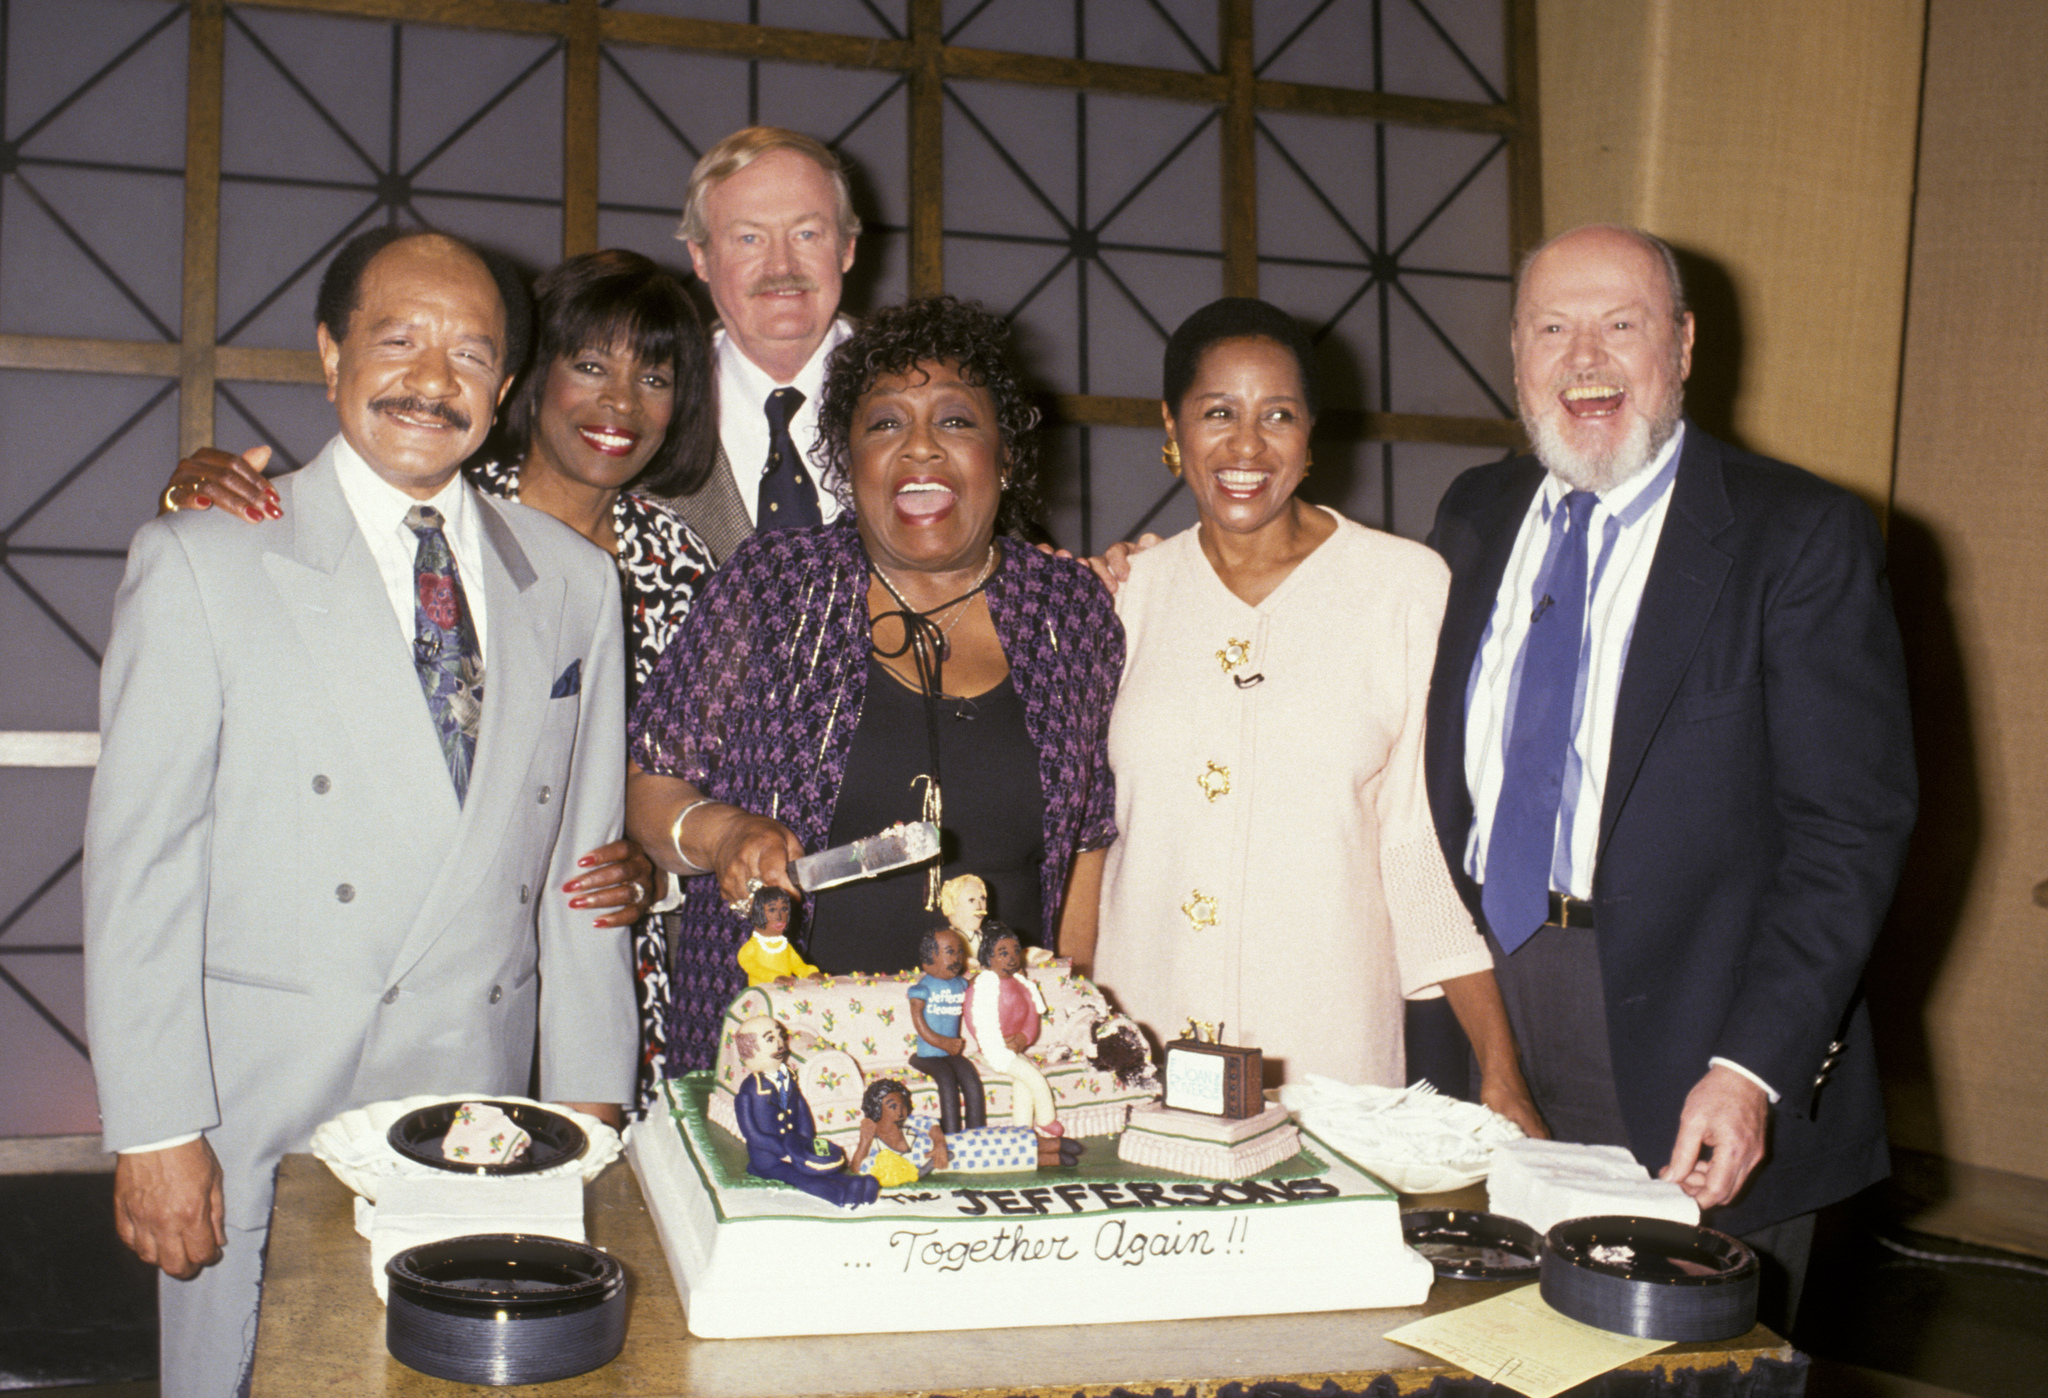 Marla Gibbs, Franklin Cover, Sherman Hemsley, Roxie Roker, Isabel Sanford and Ned Wertimer at event of The Jeffersons (1975)